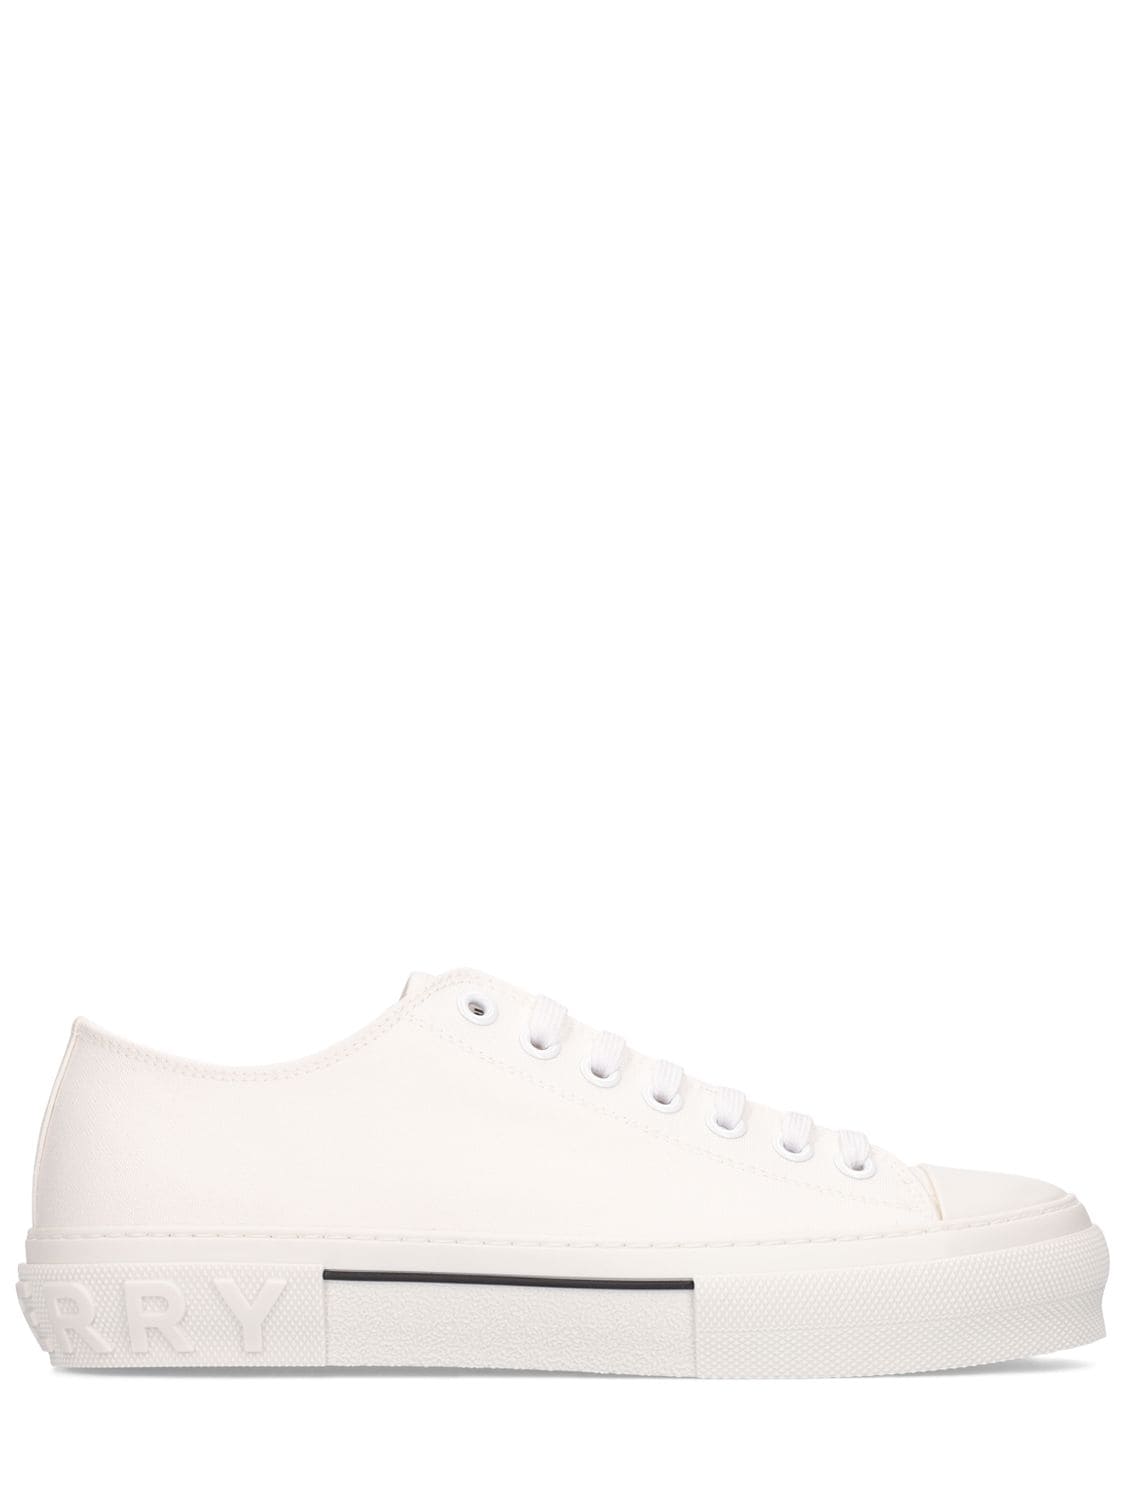 BURBERRY Jack Canvas Low Top Sneakers